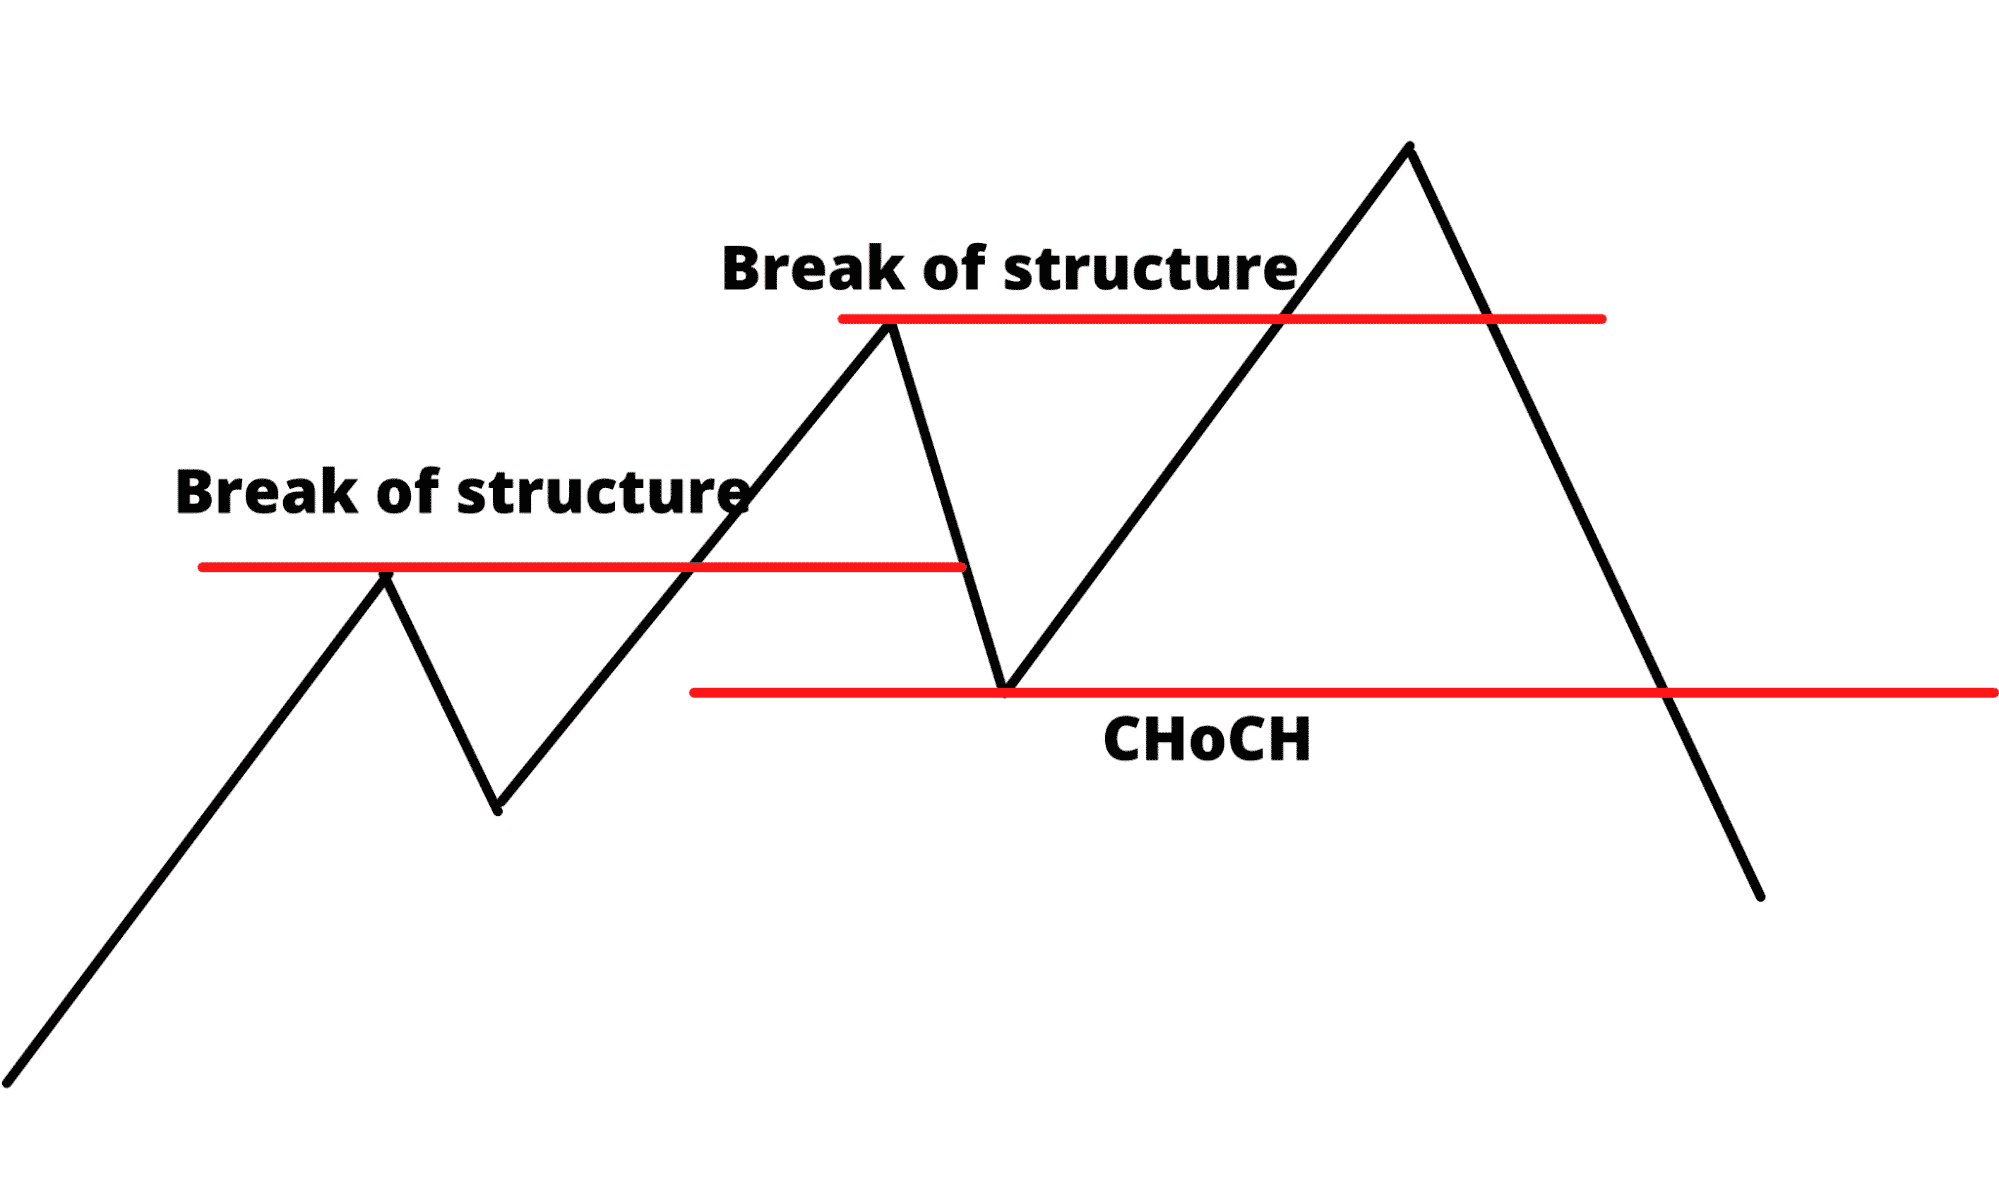 Break of structure and CHoCH